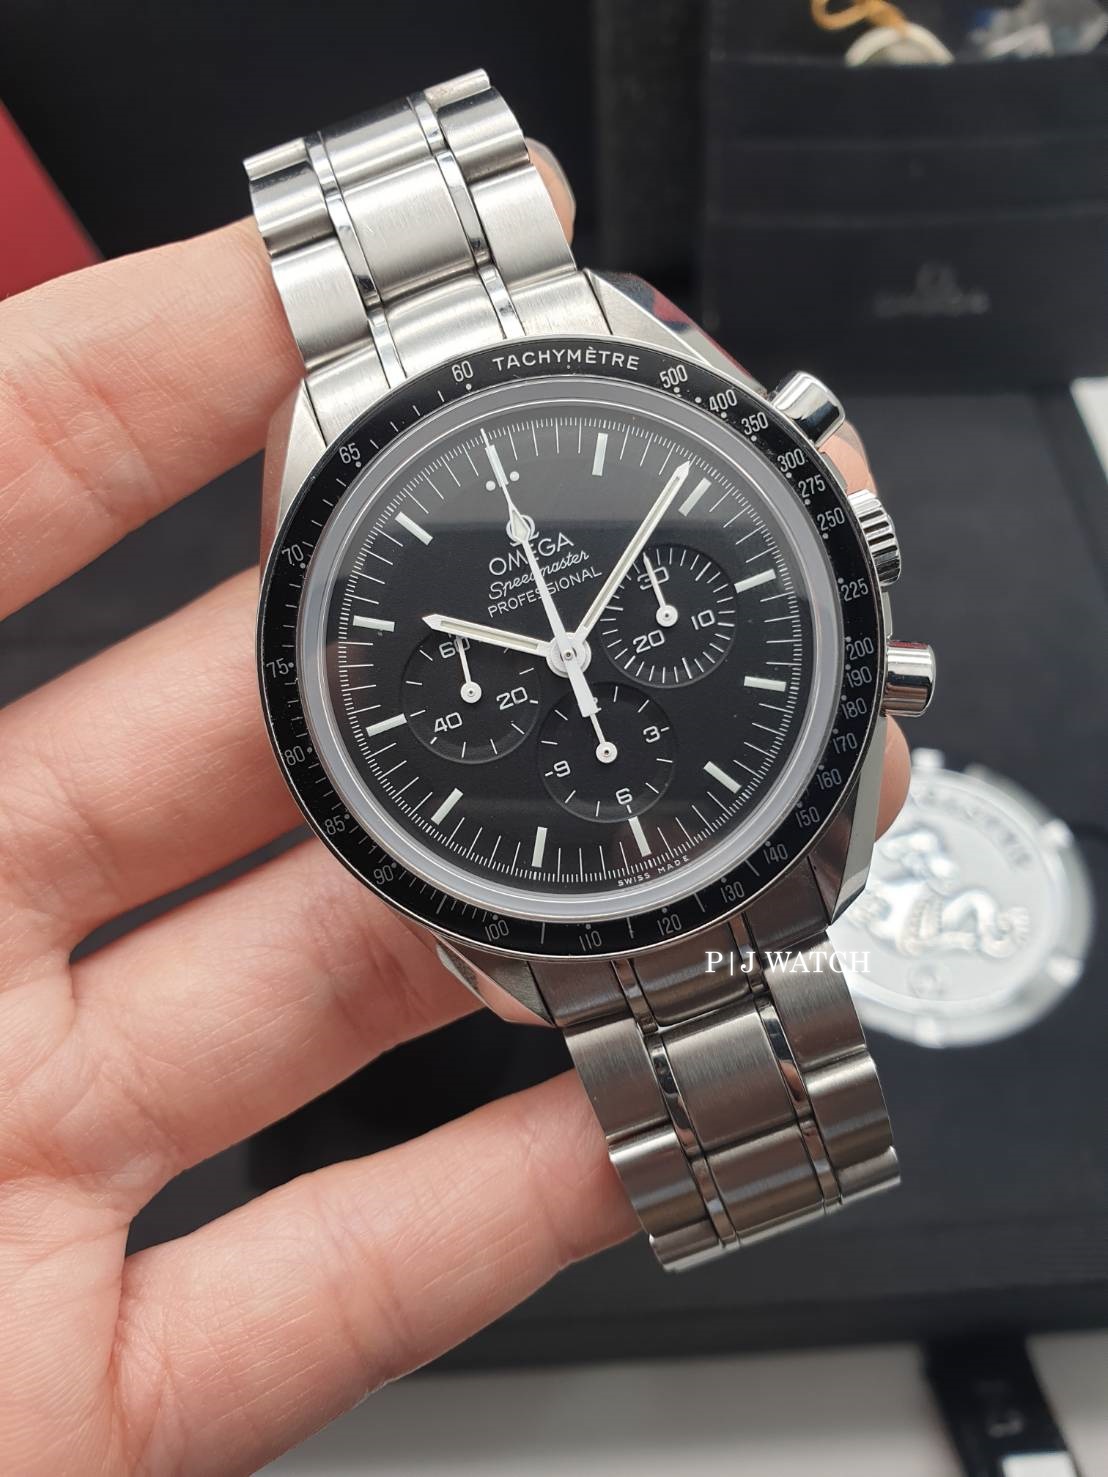 OMEGA Speedmaster Moonwatch The first watch worn on the Moon